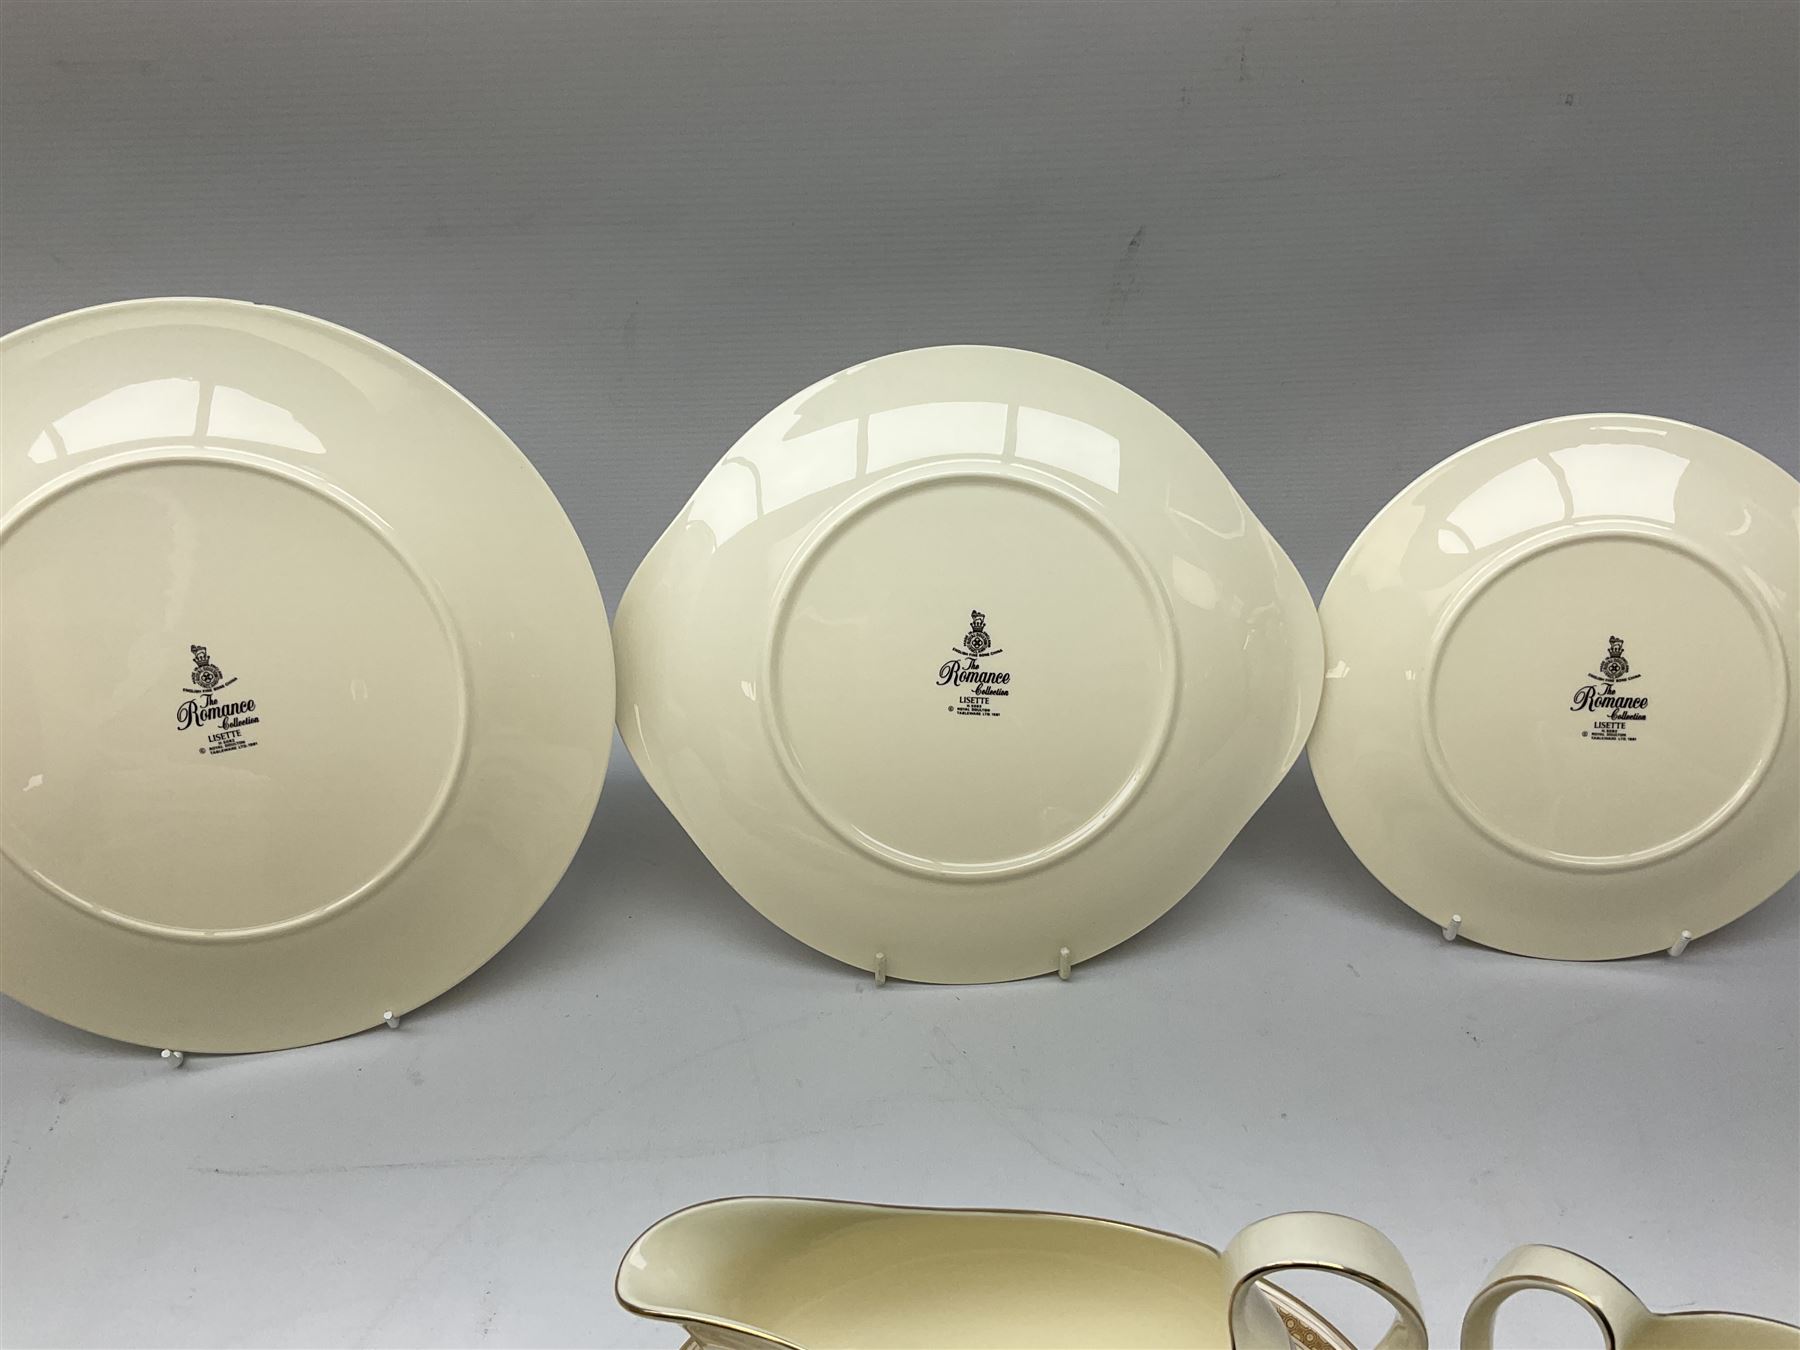 Royal Doulton ‘The Romance Collection’ dinner service decorated in the ‘Lisette’ pattern for six - Image 3 of 4